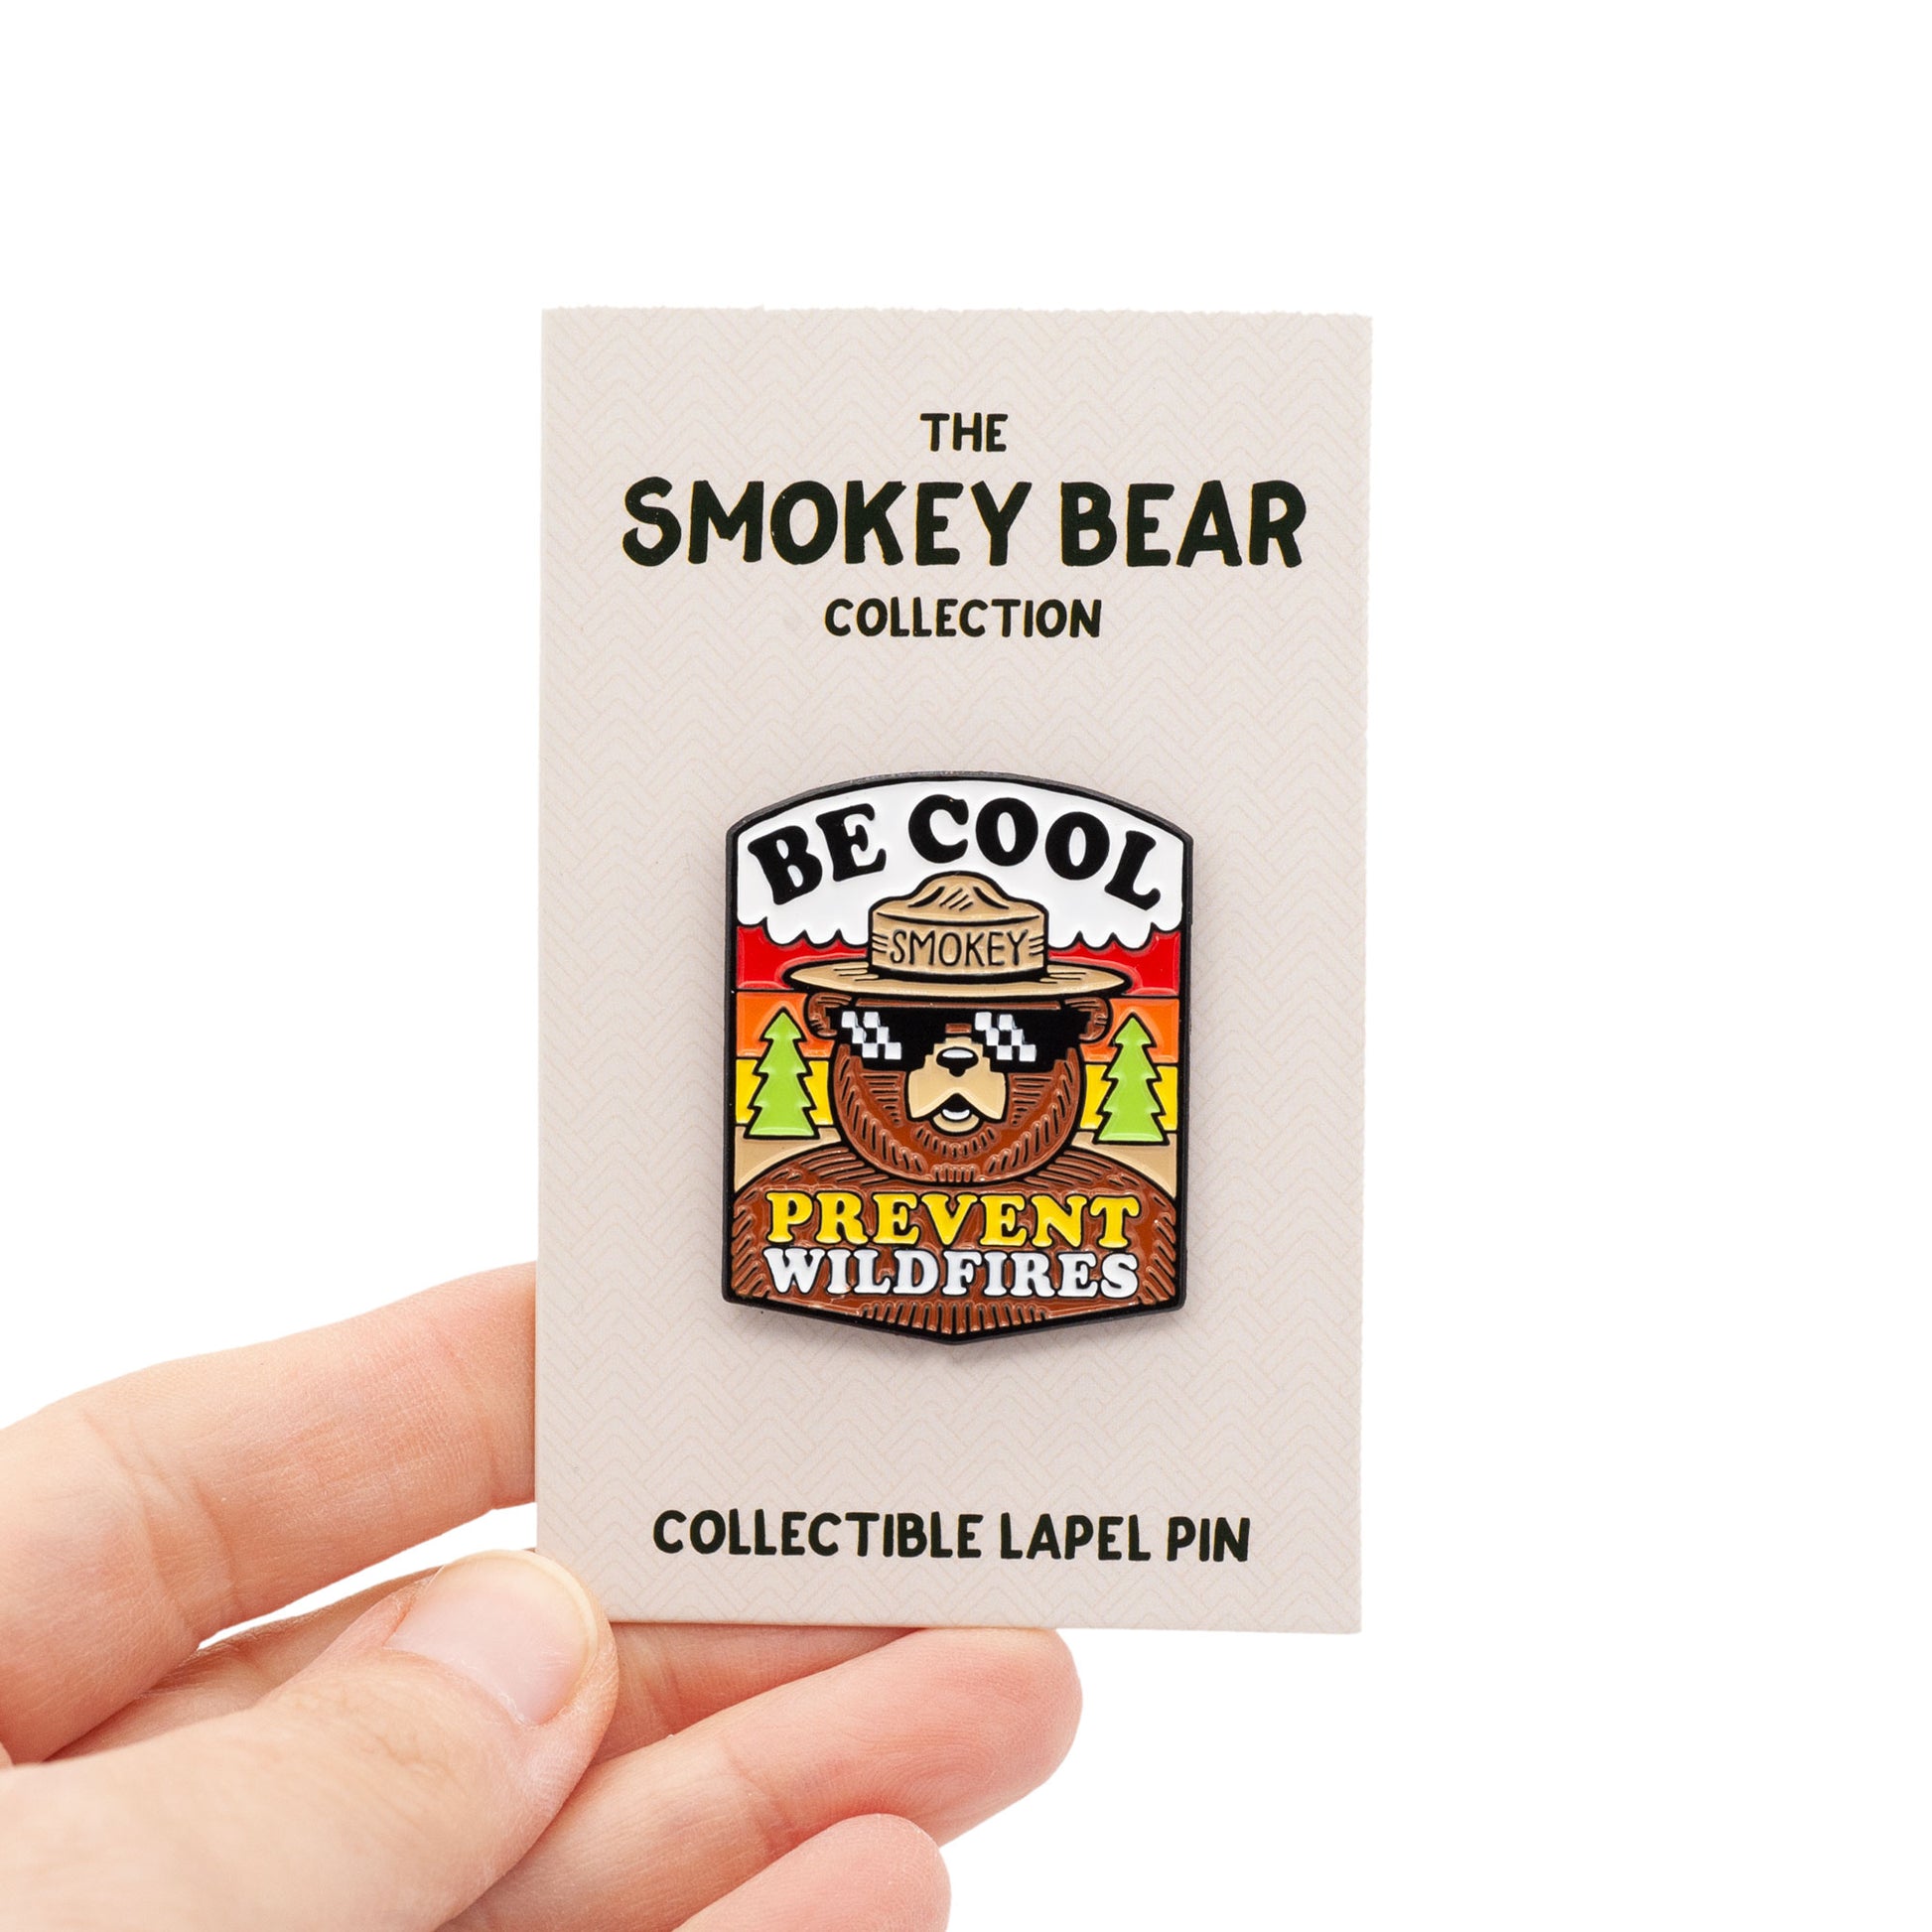 smokey bear with cool sunglasses on and a forest background. type says "be cool, prevent wildfires". On backing card, being held by hand, over white background.